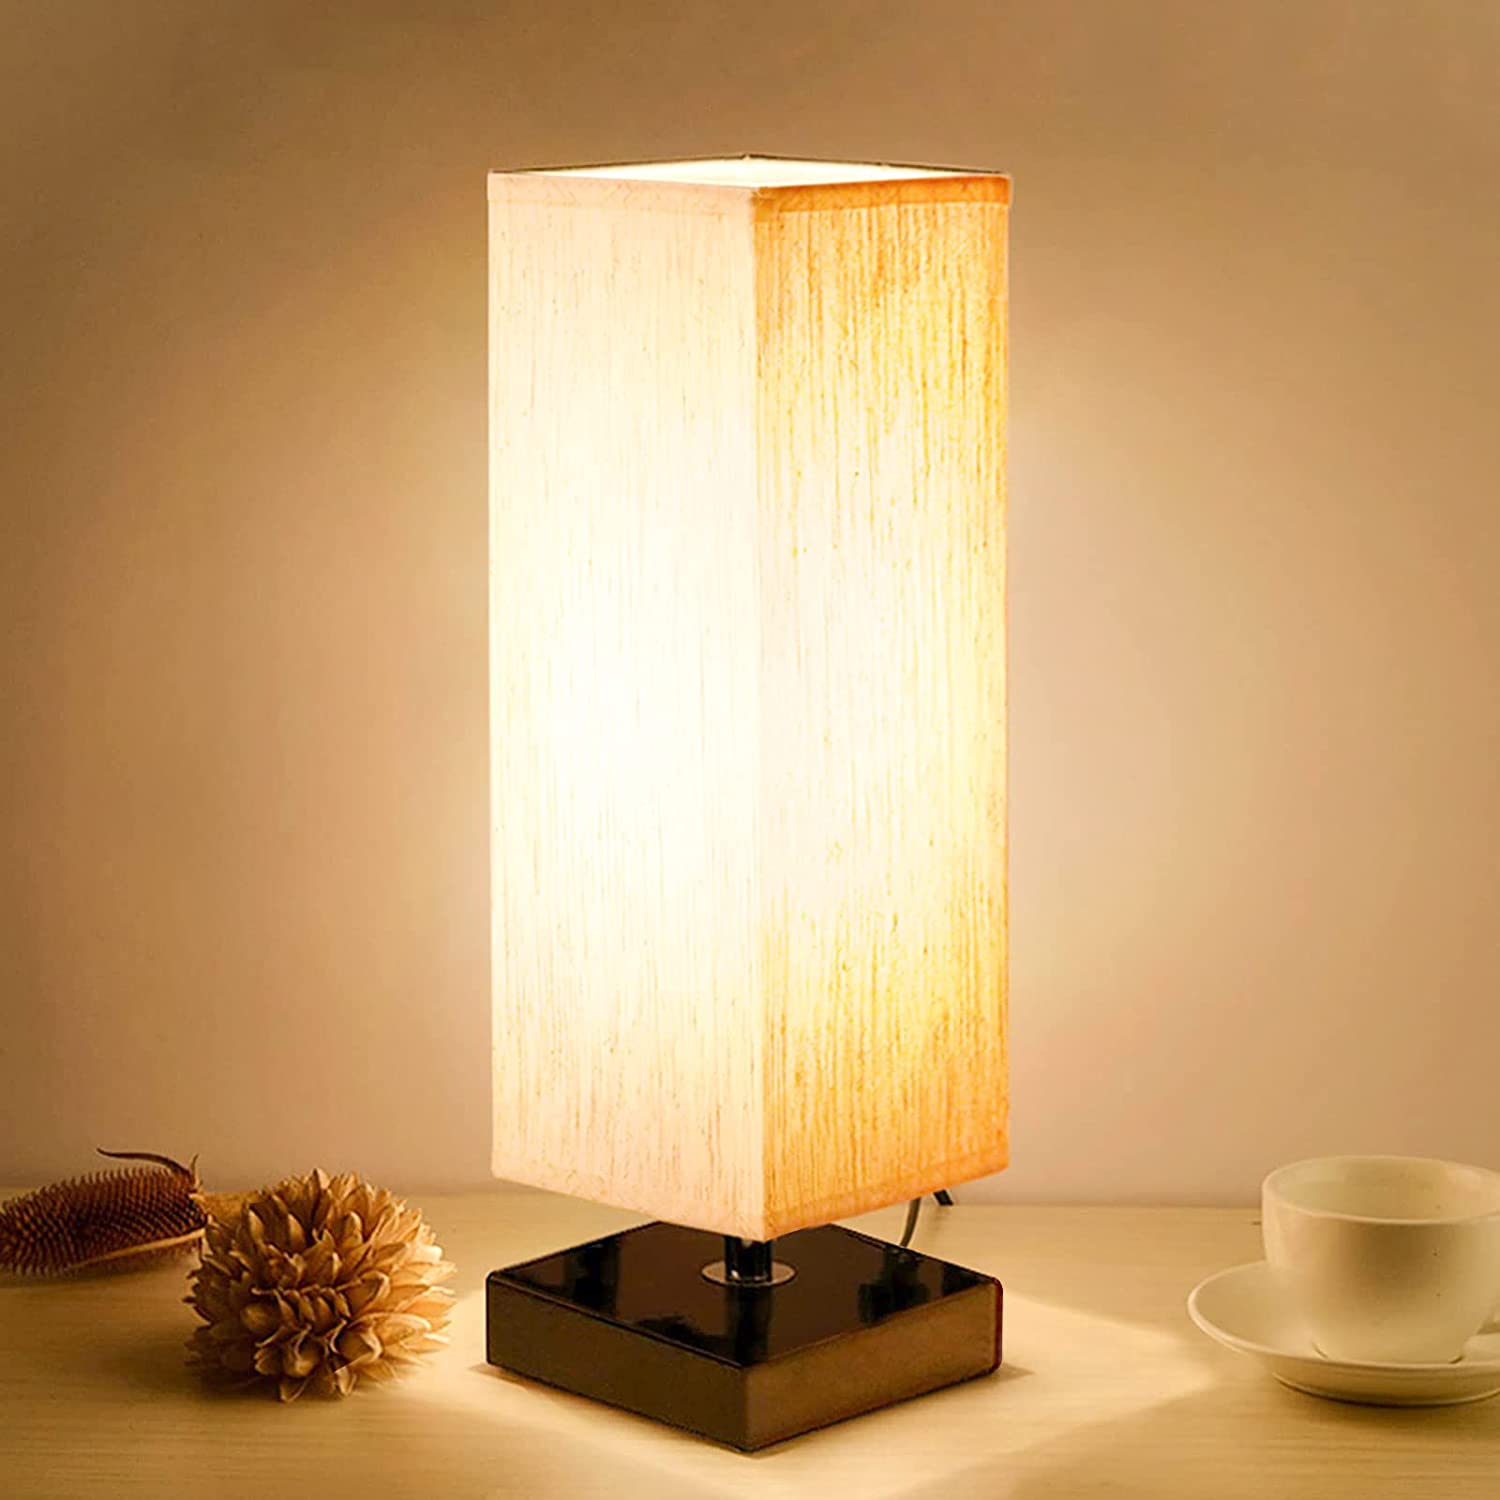 Bedroom small table lamp